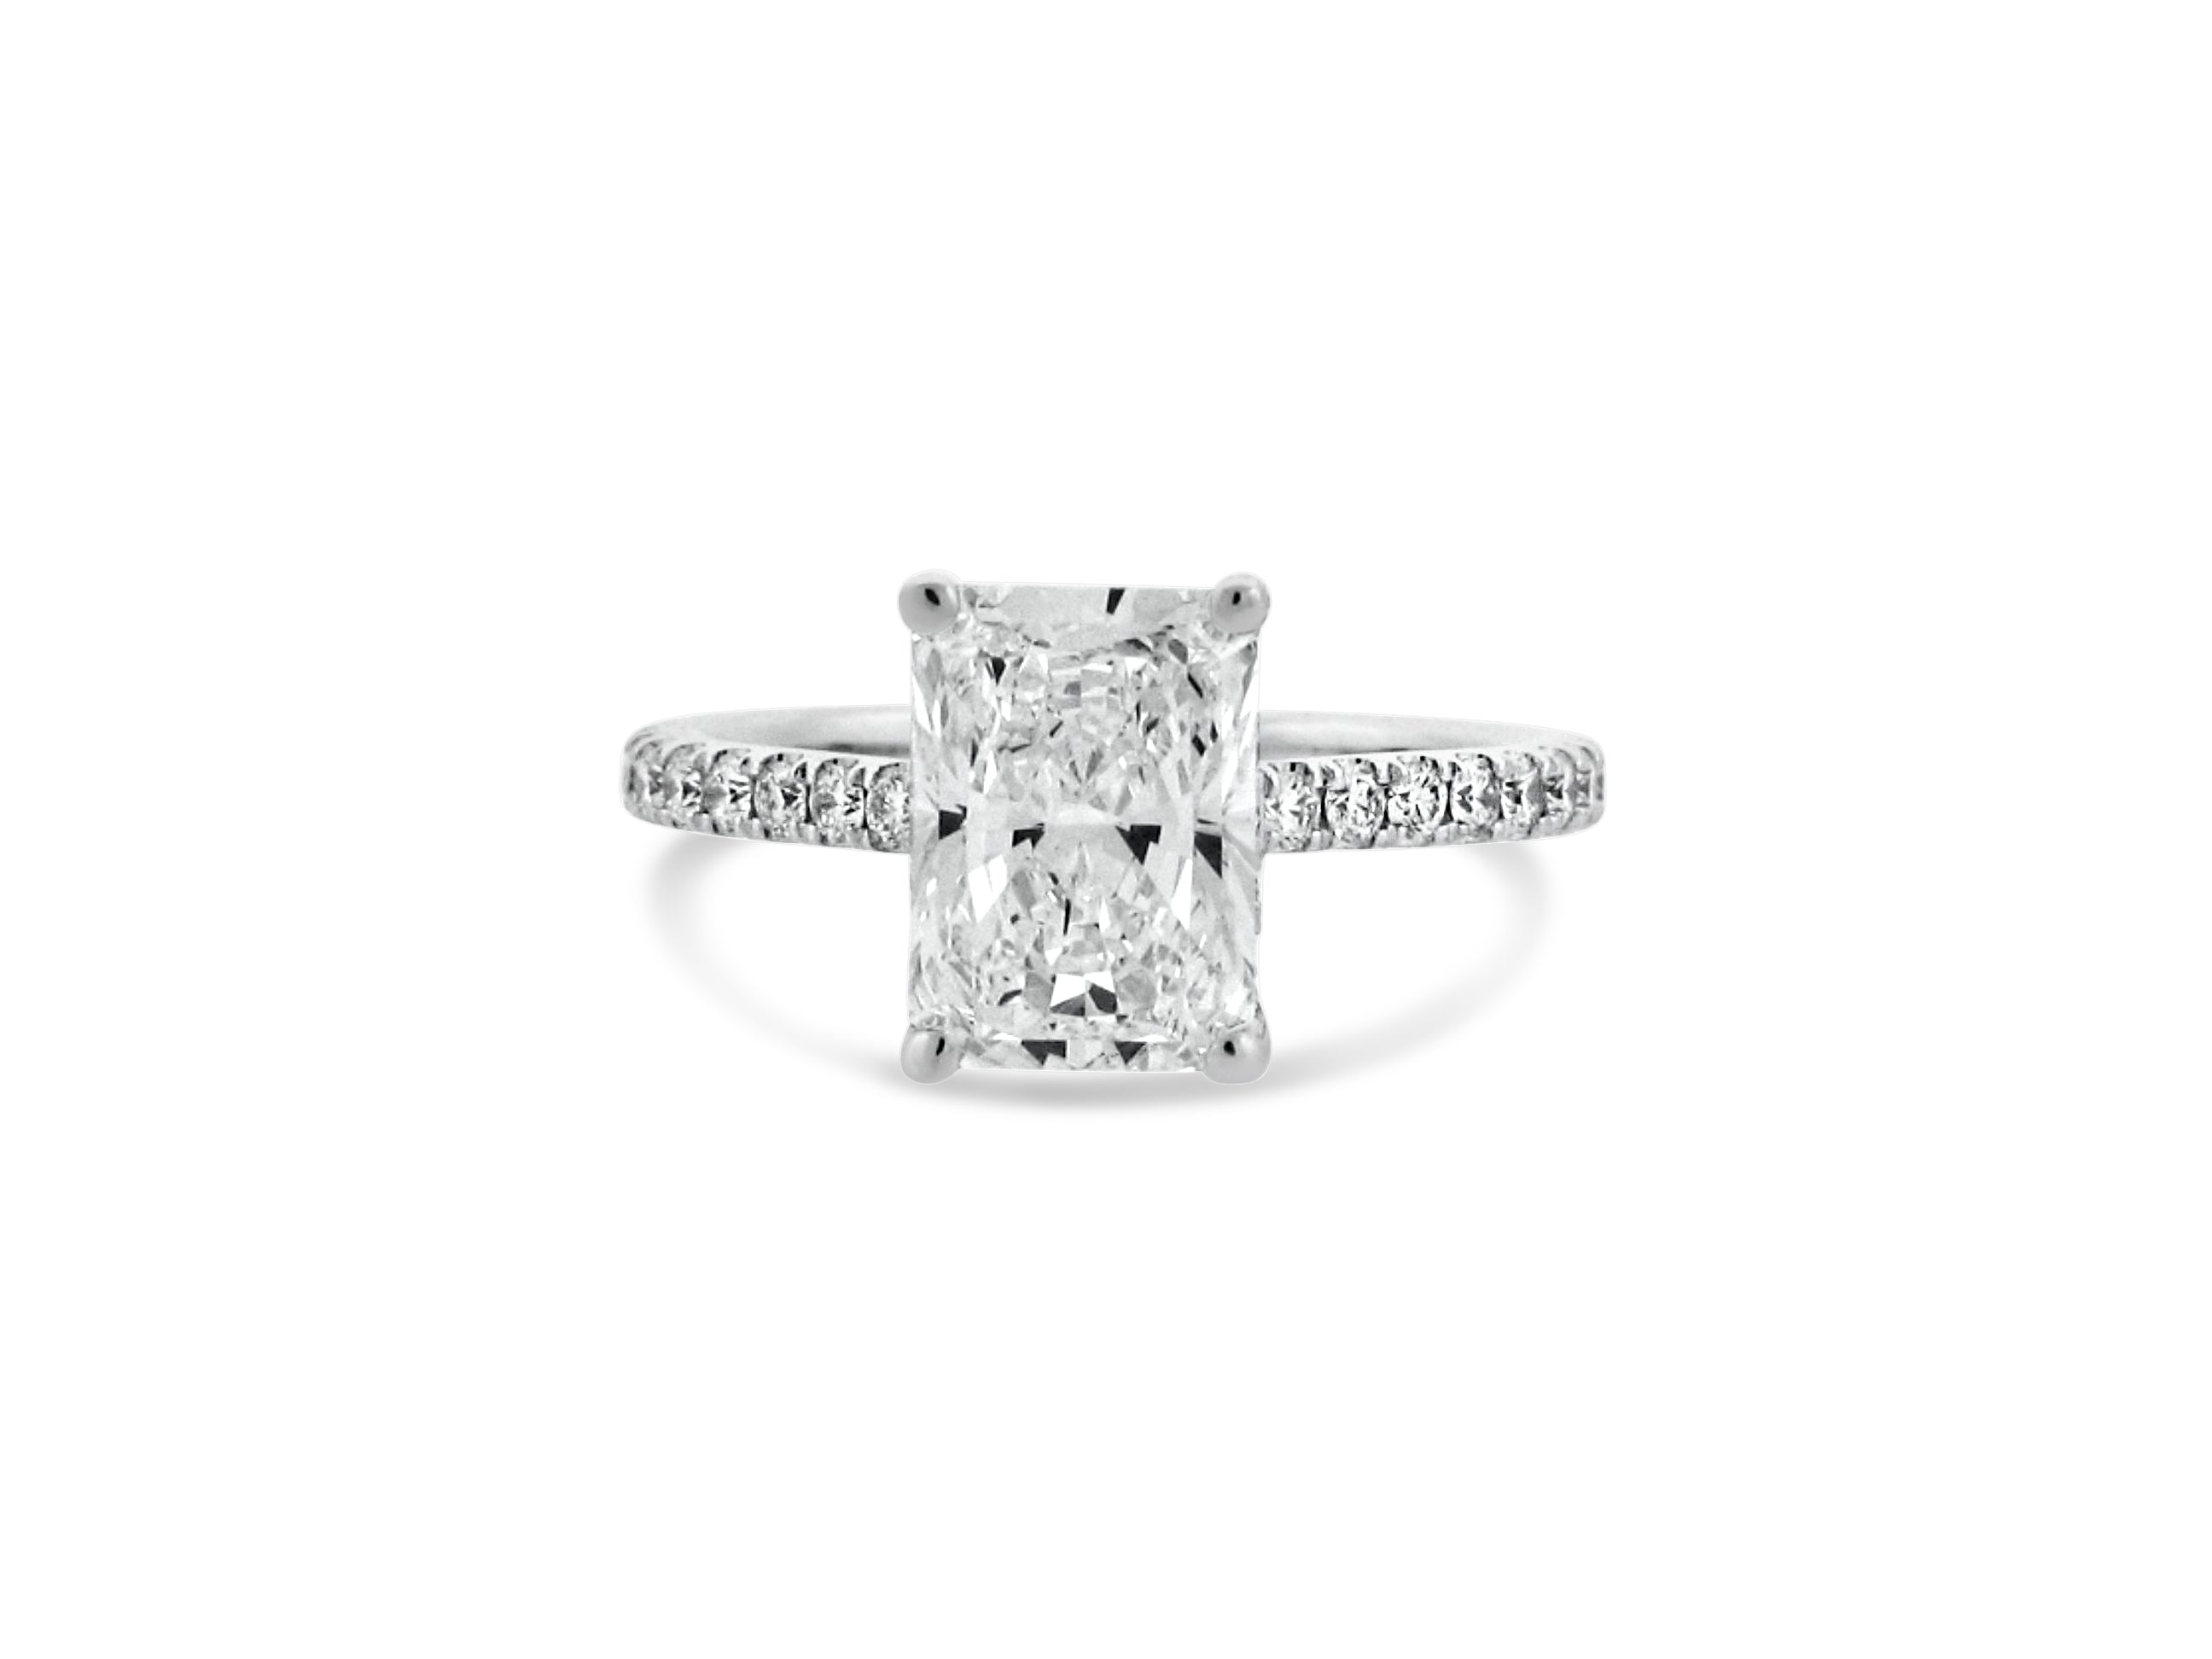 PRIVE' 18K WHITE GOLD 2.59CT VS2 CLARITY AND F COLOR  RADIANT CUT SWAROVSKI LAB GROWN DIAMOND SURROUNDED BY .50CT SI/F NATURAL DIAMOND ACCENTS.  CERTIFIED EXCELLENT CUT GRADE.